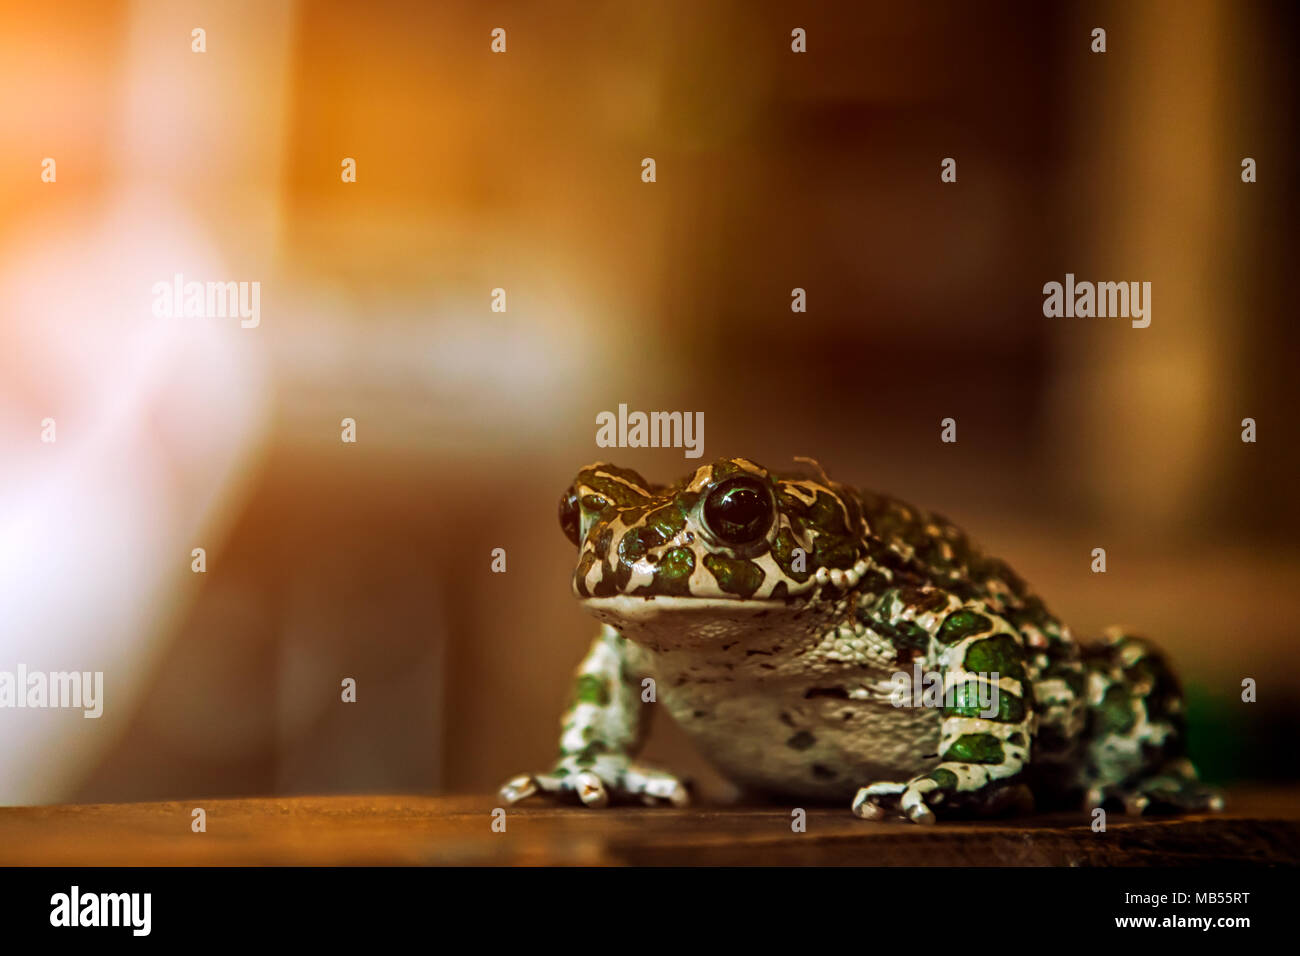 Close-up of a beautiful green spotted frog or Pelophylax ridibundus  with large black eyes sitting on a wooden shelf Stock Photo